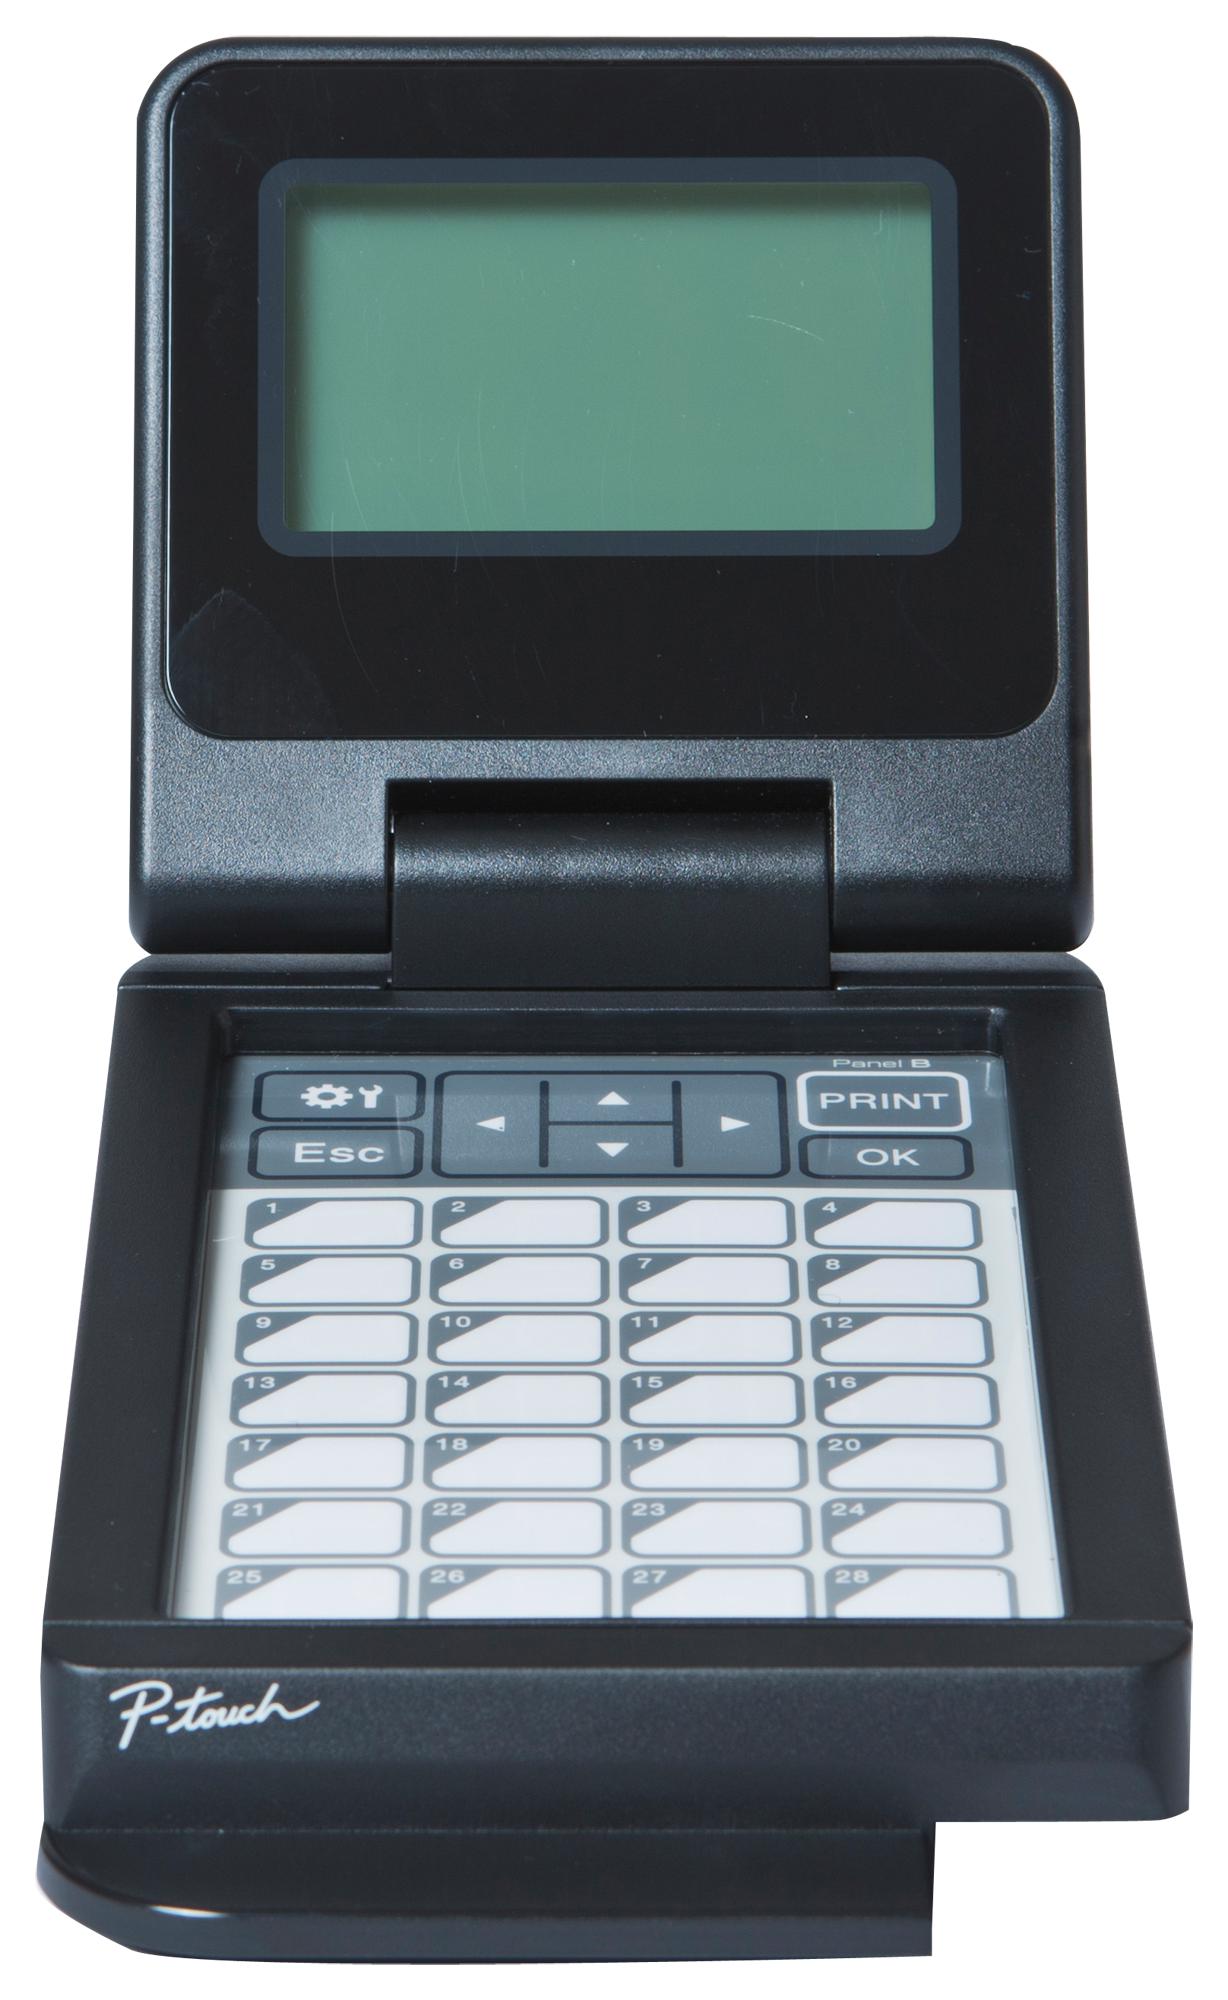 PATDU003 TOUCH PANEL W/DISPLAY, LABEL PRINTER BROTHER